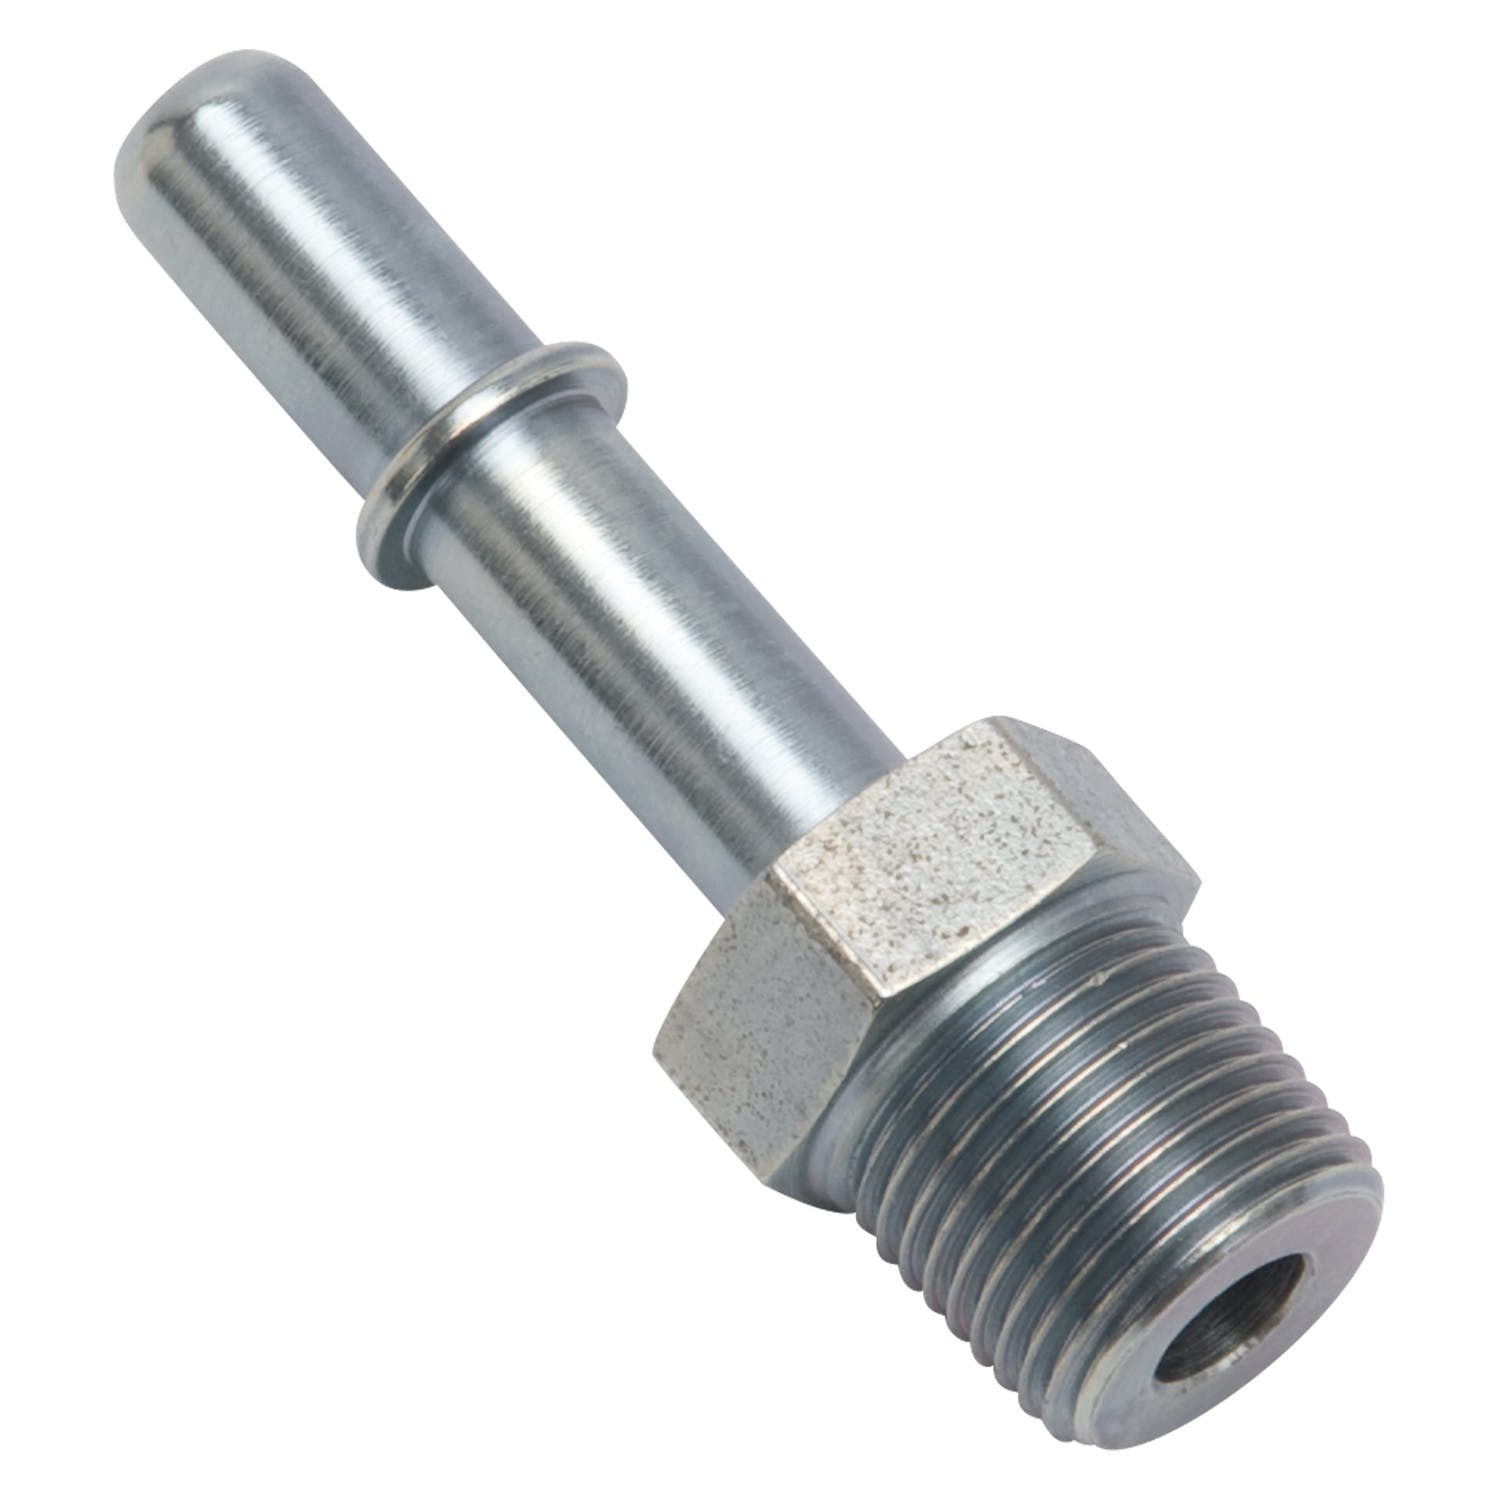 Russell 640690 Adapter Fitting. 3/8 inch Push-on EFI to 3/8 NPT